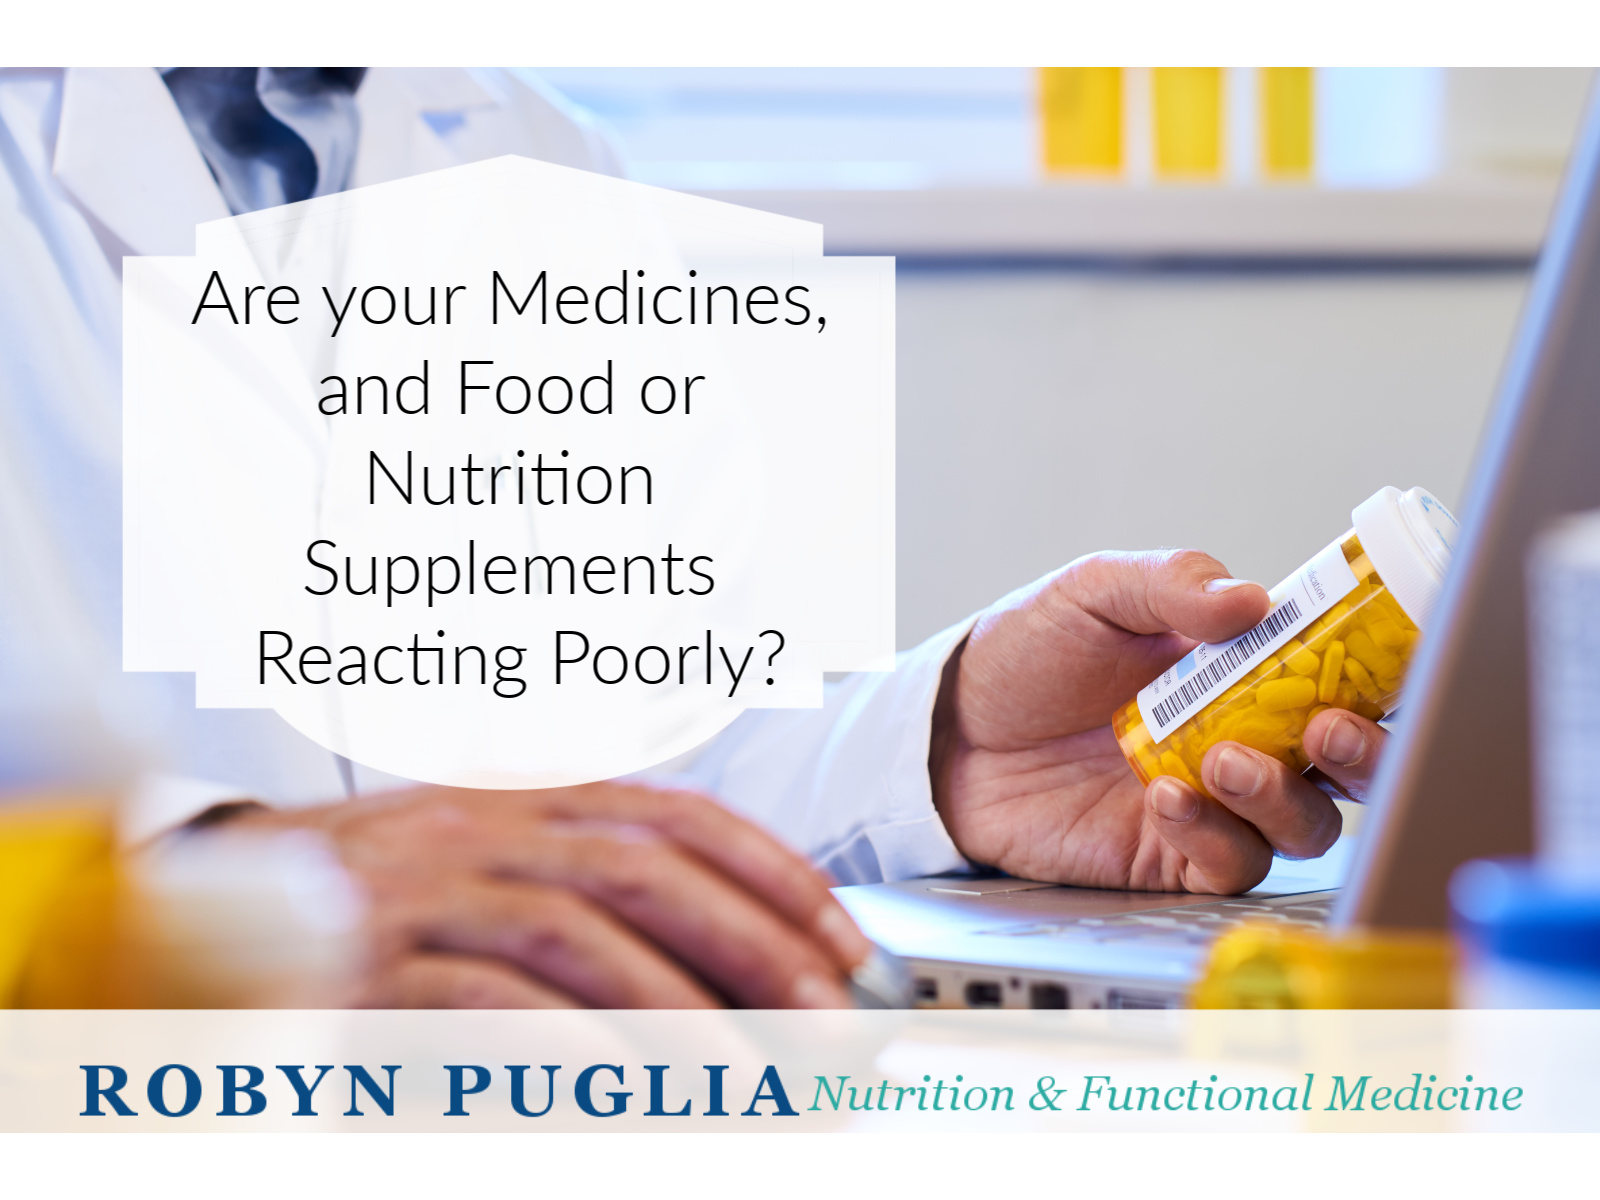 Is Your Medication Reacting Poorly with Your Food?